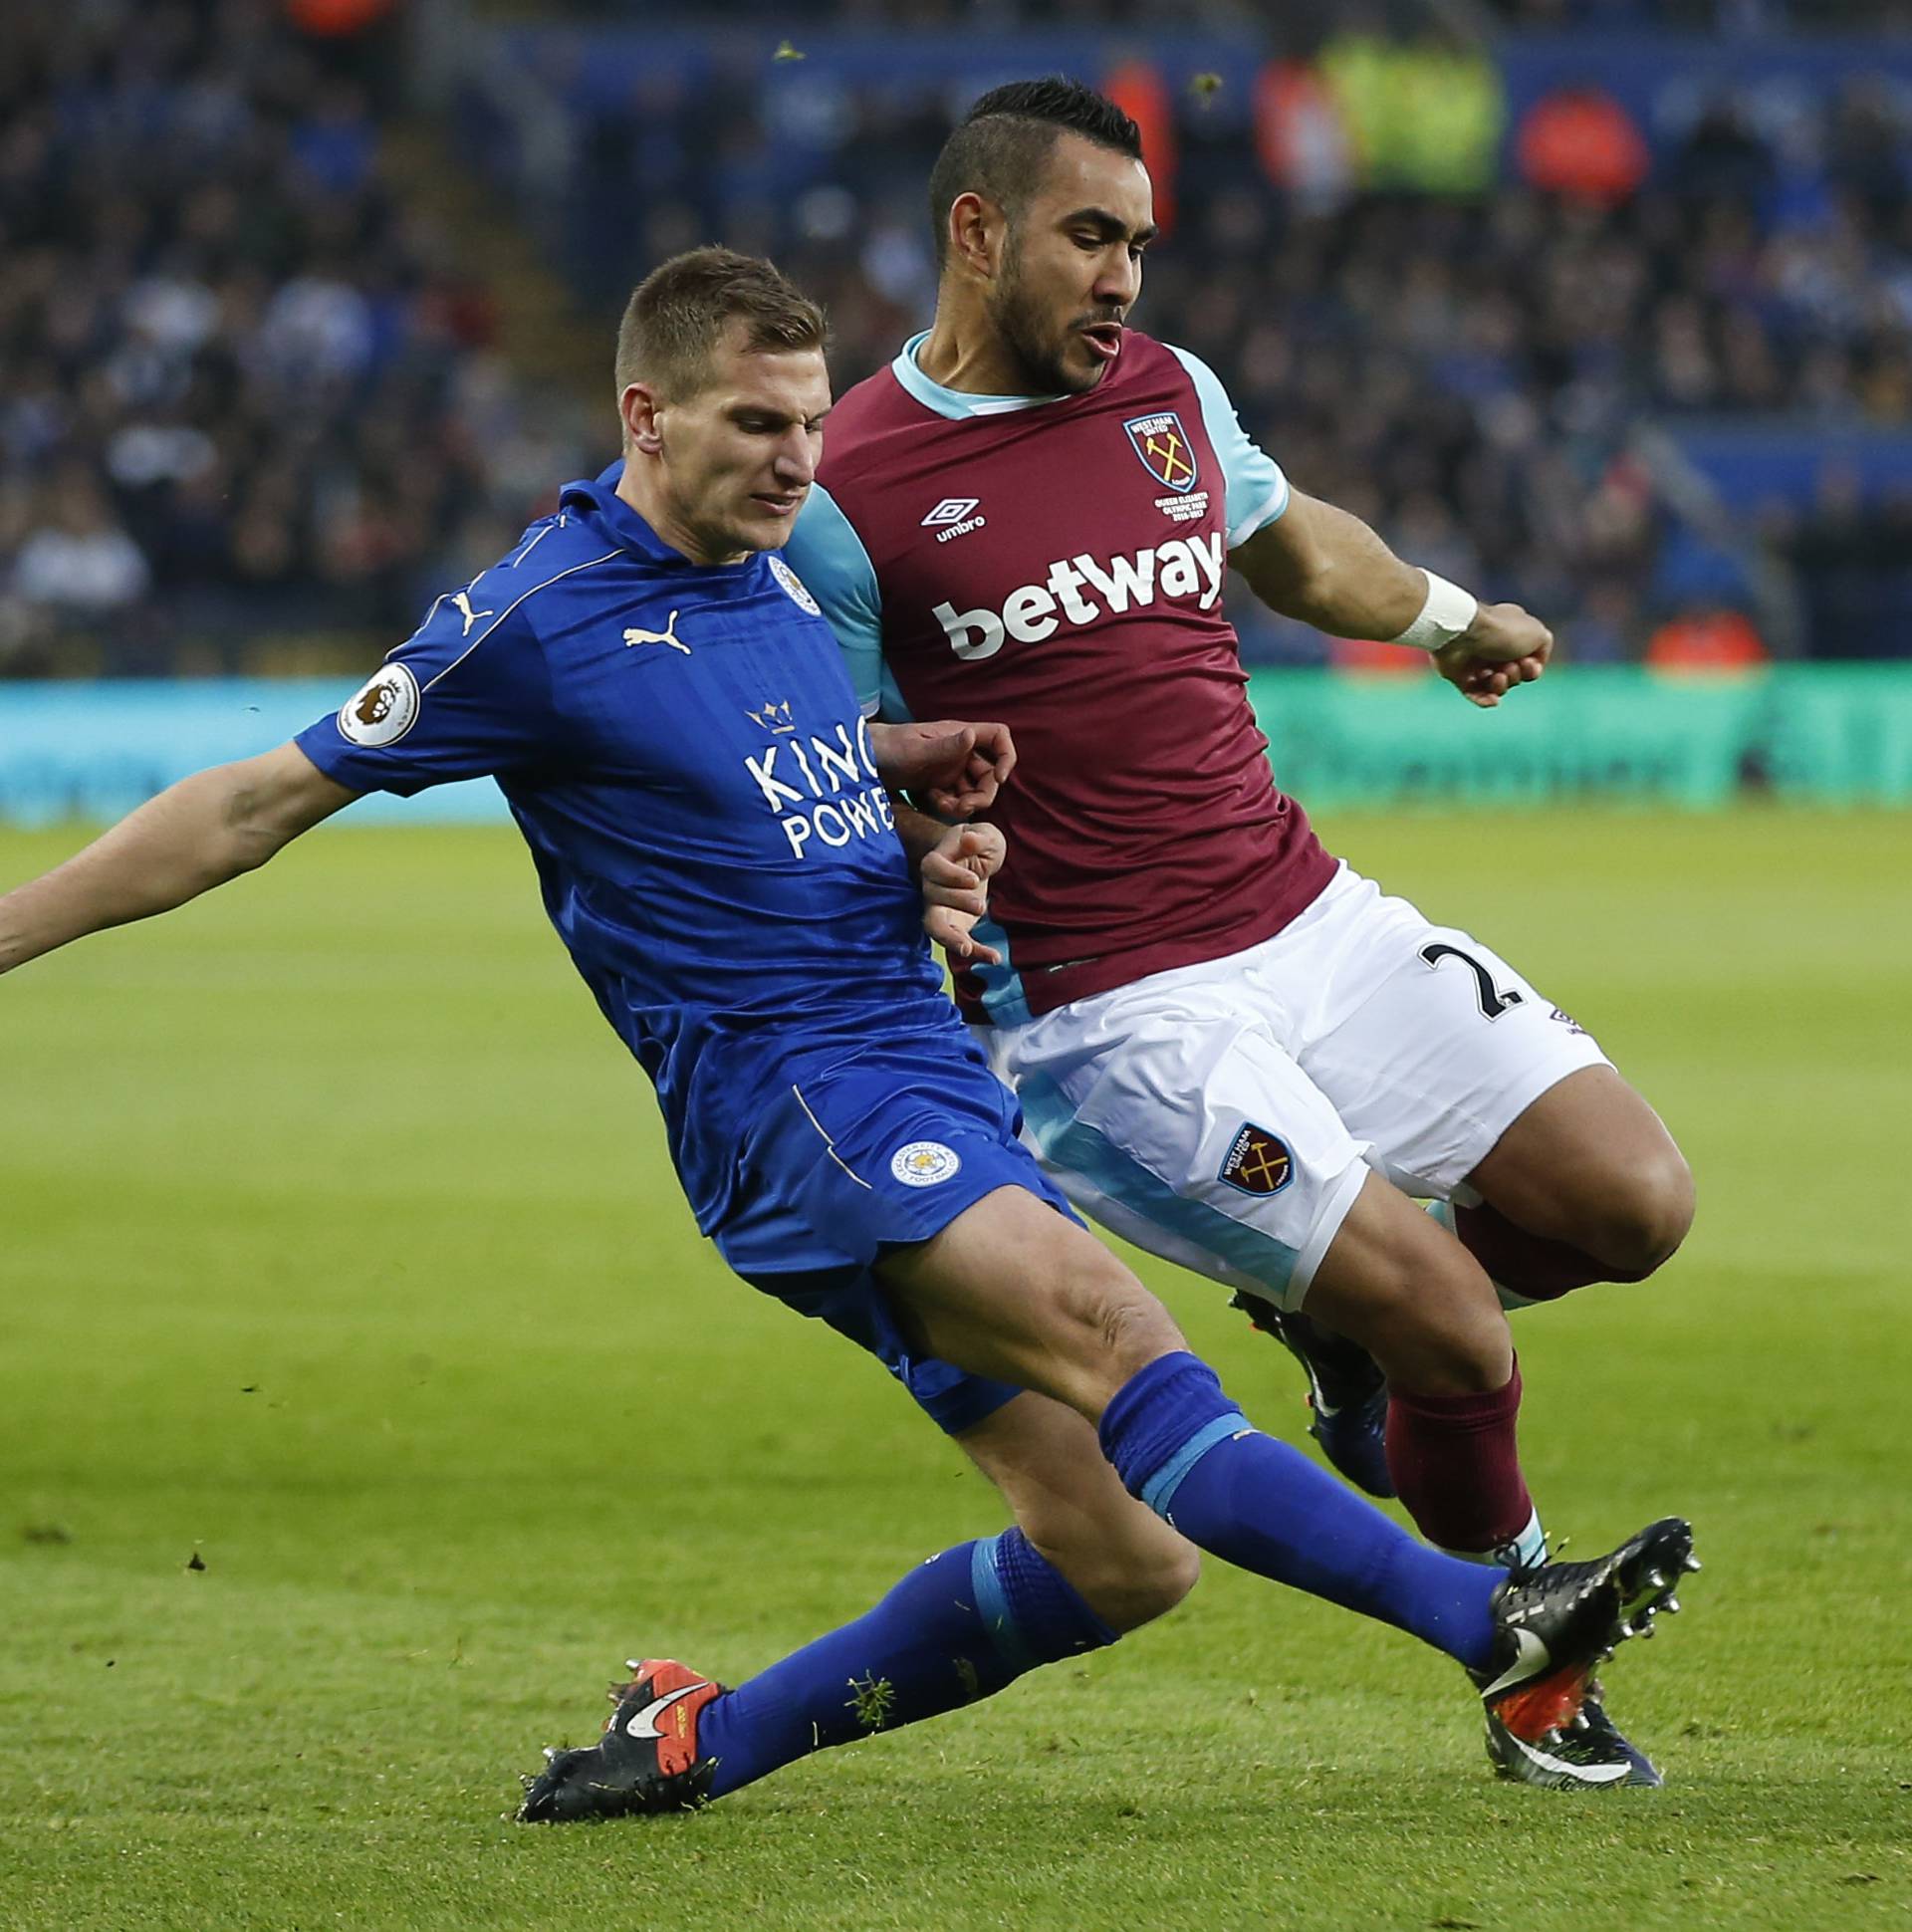 West Ham United's Dimitri Payet in action with Leicester City's Marc Albrighton